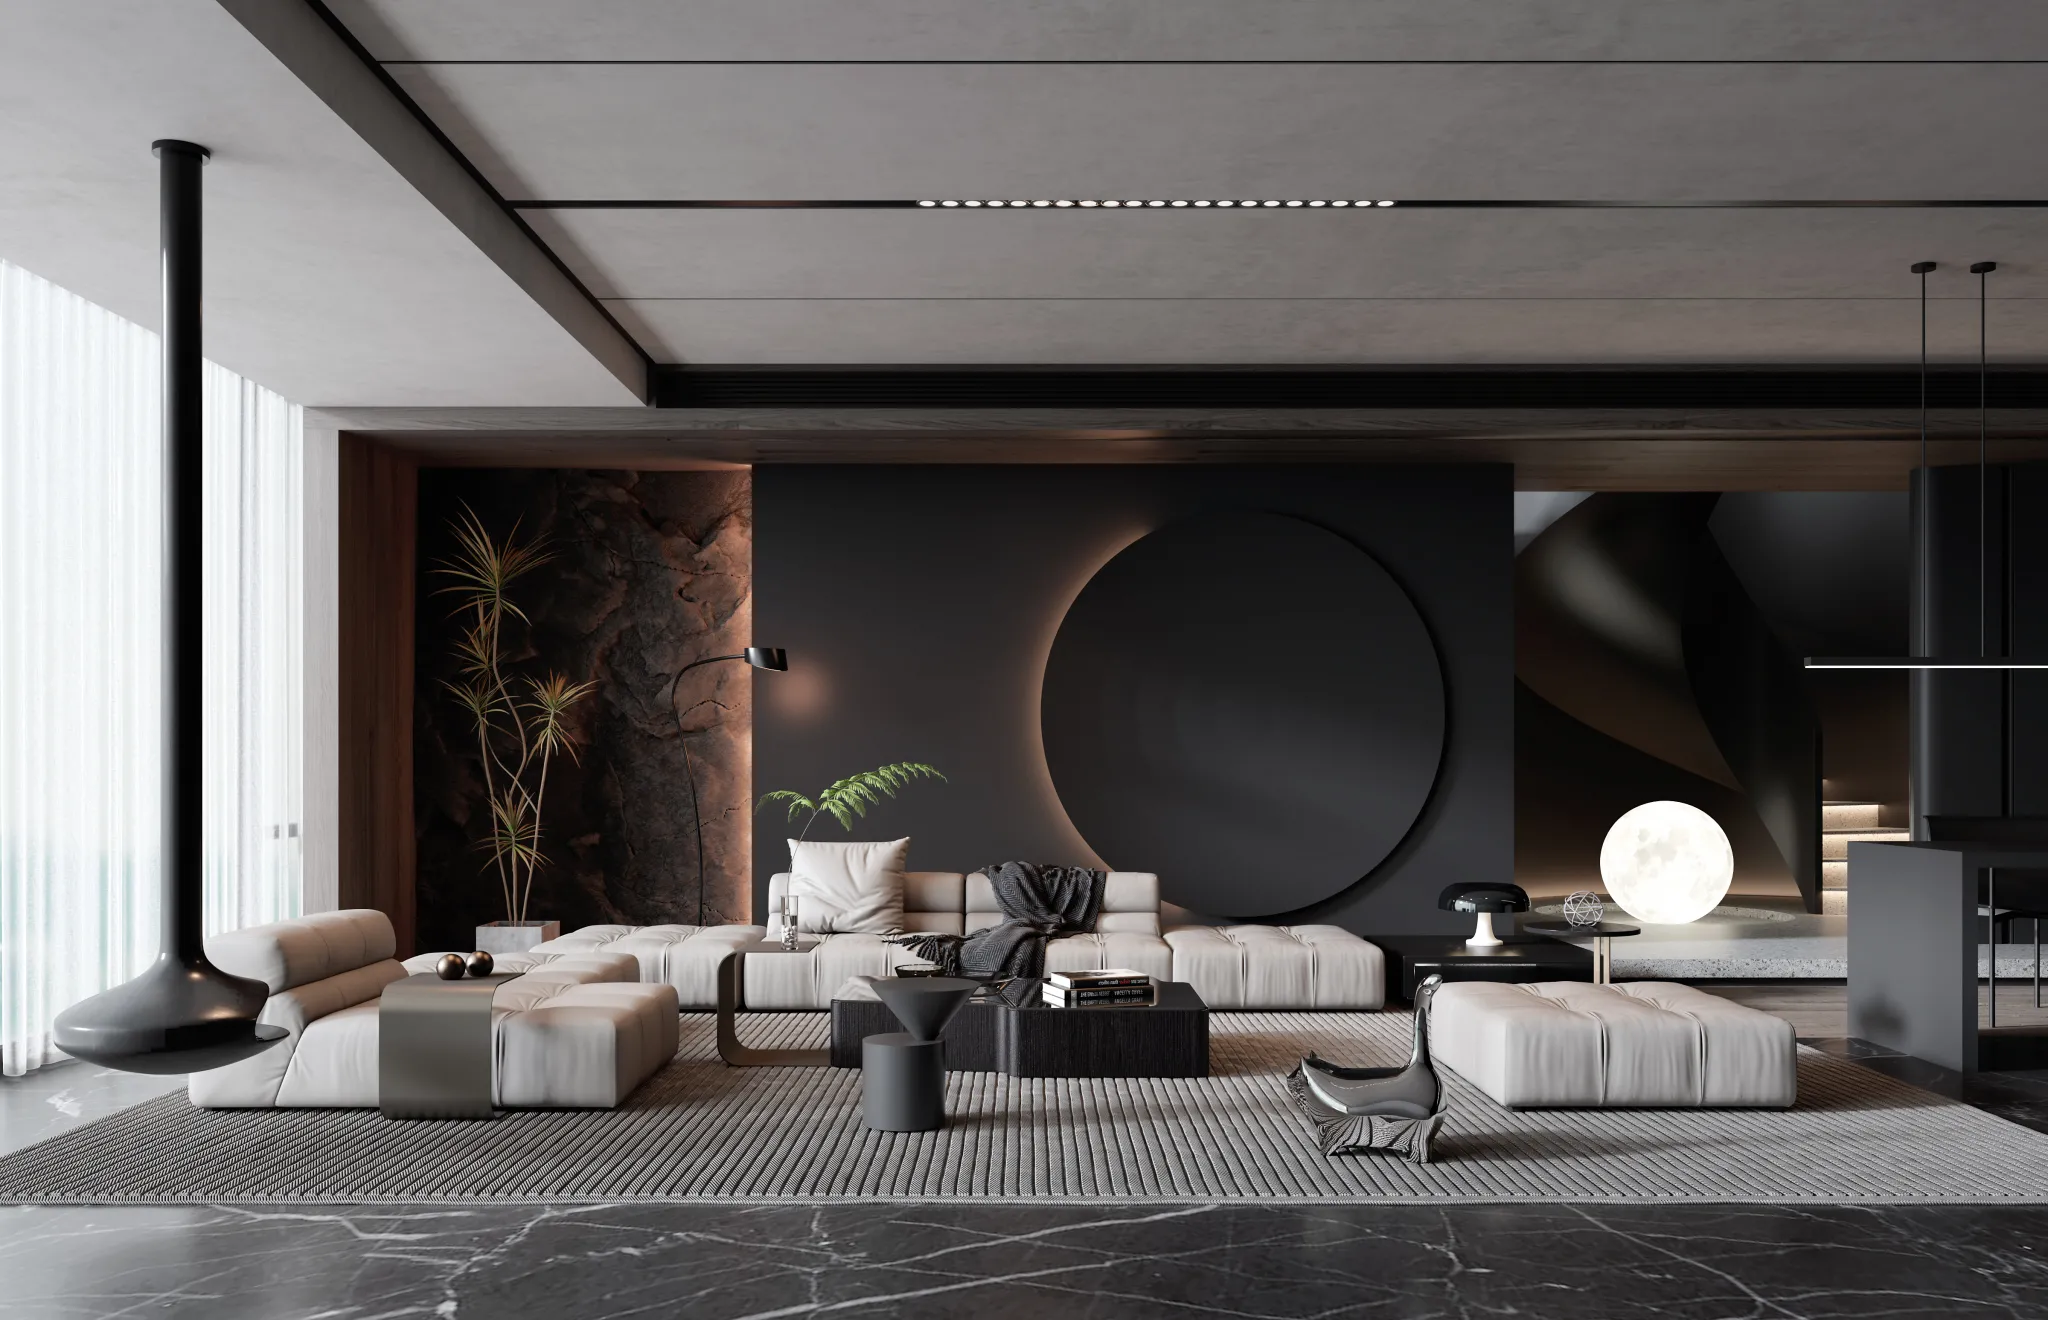 HOUSE SPACE 3D SCENES – LIVING ROOM – 0122